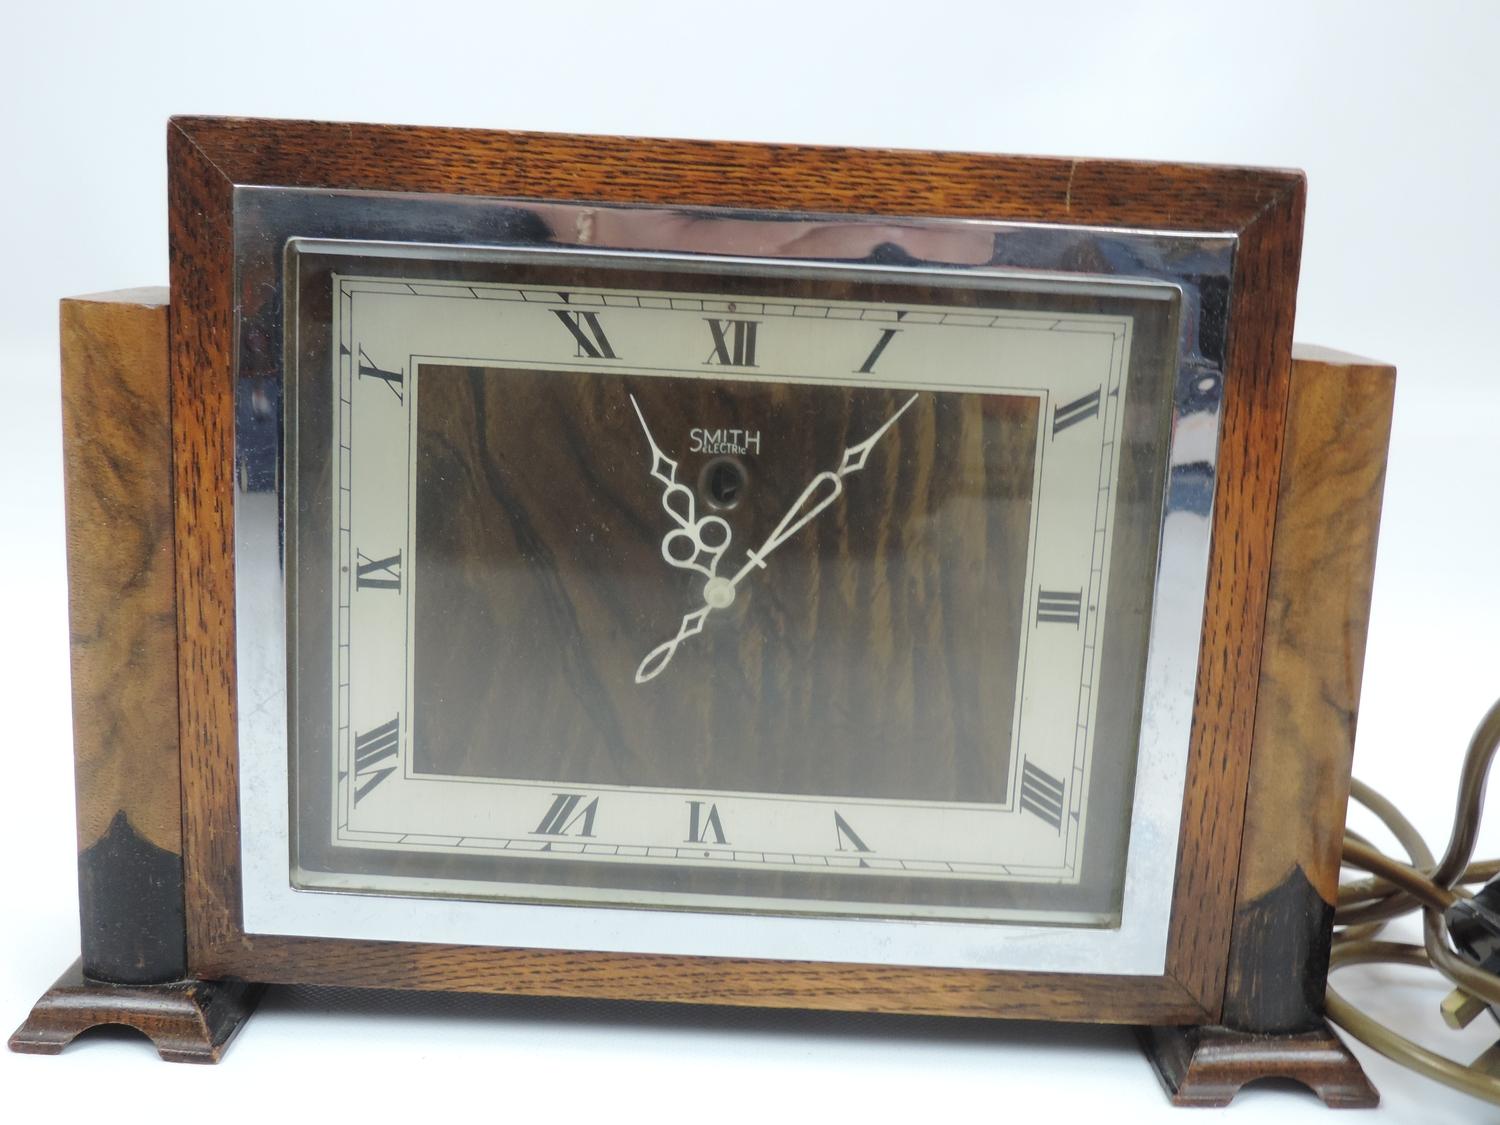 Smith's Electric Clock - Image 2 of 4